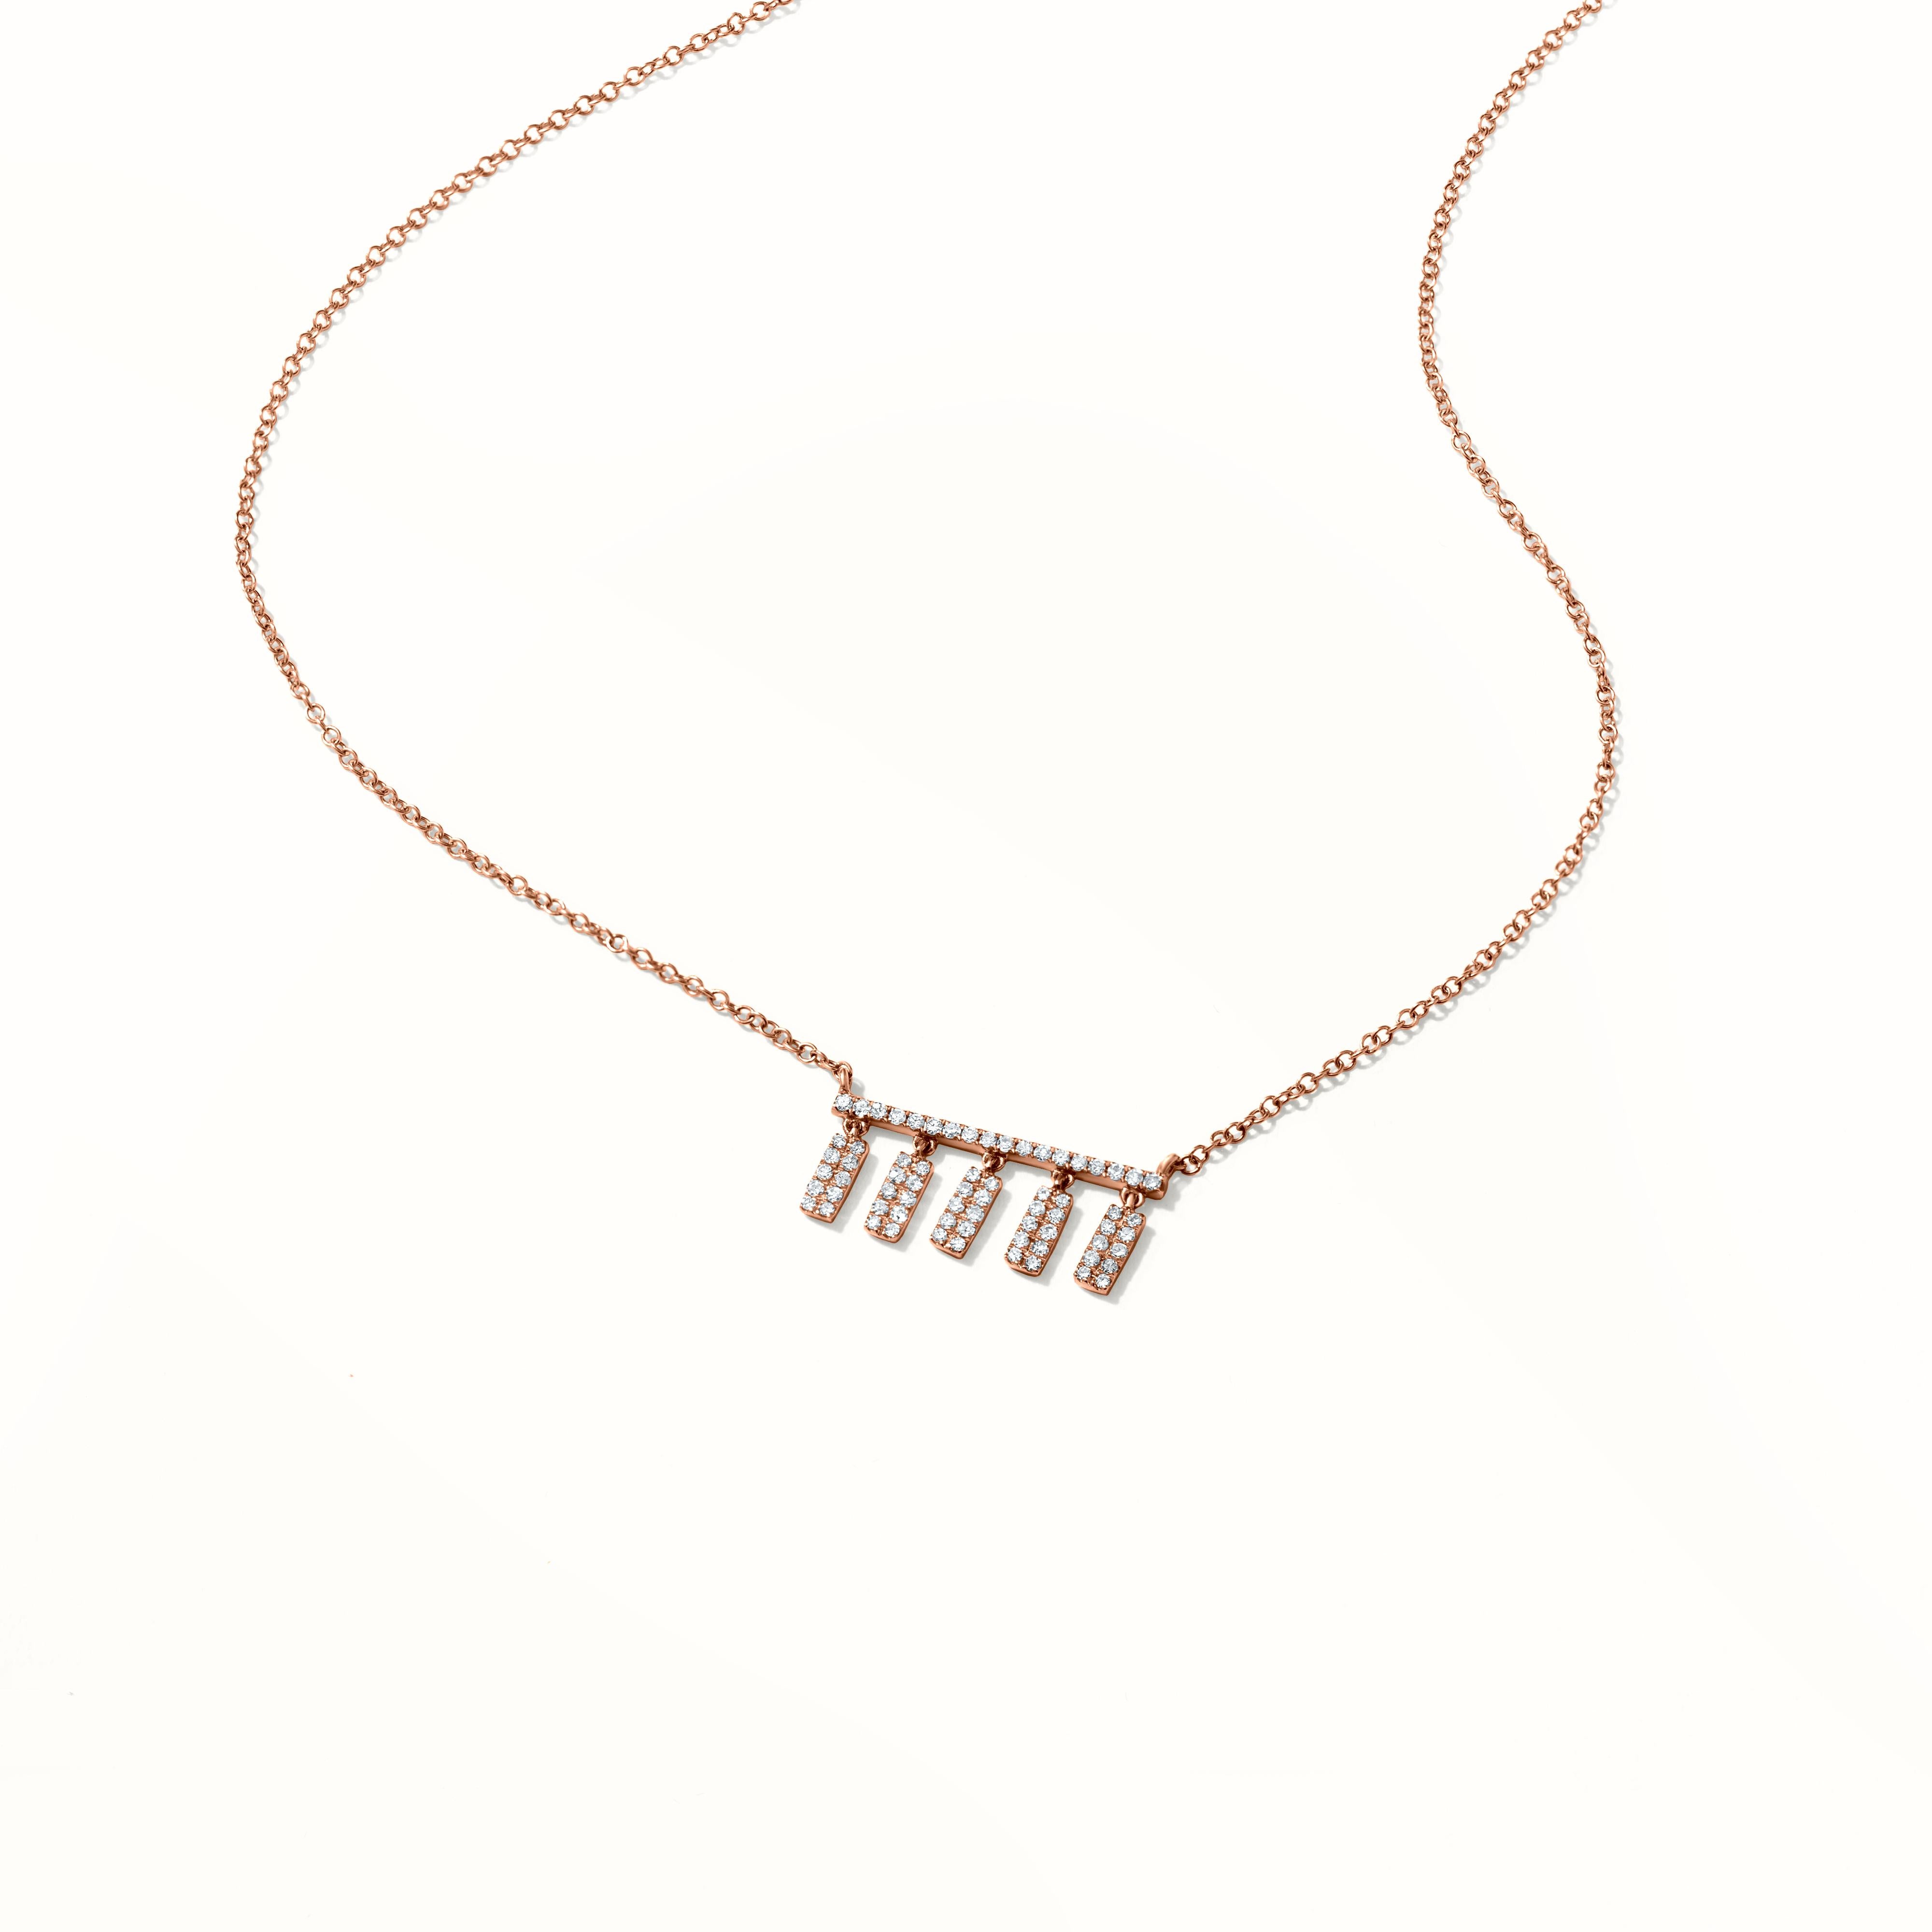 Luxle Diamond Pendant Necklace in 14k Rose Gold In New Condition For Sale In New York, NY